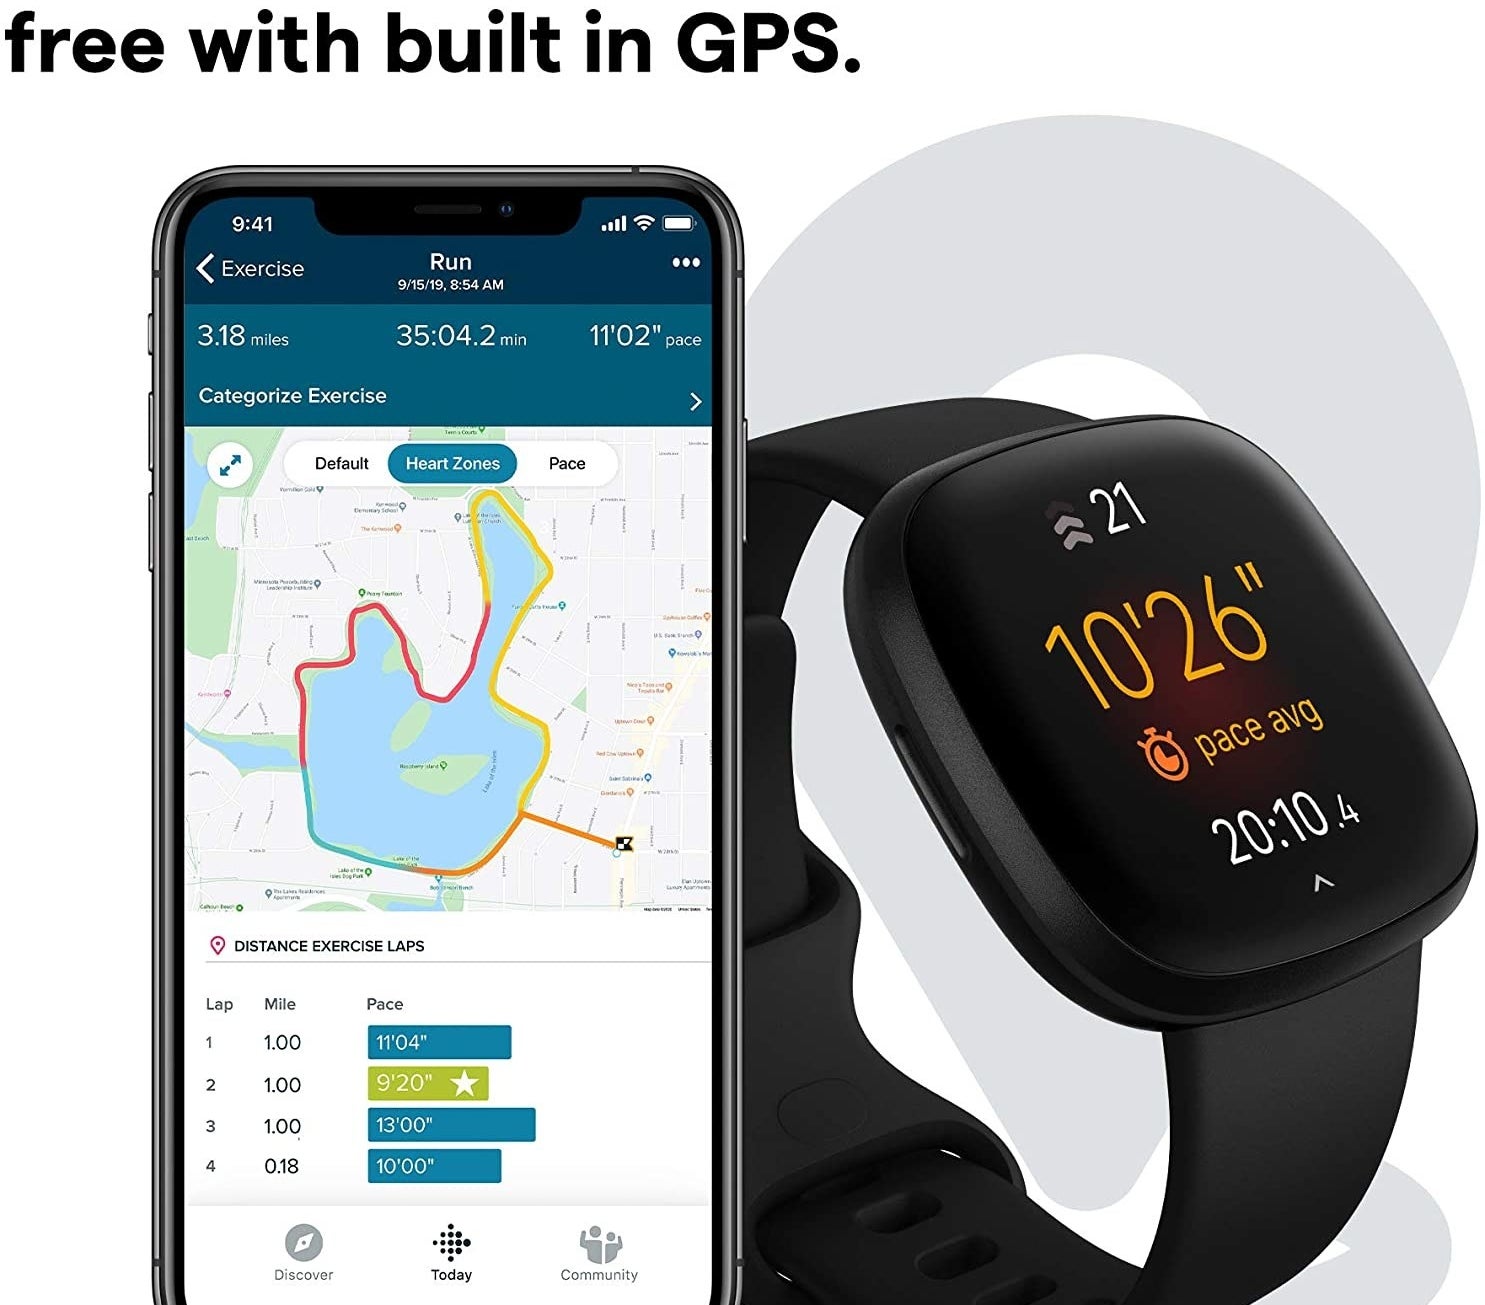 The versa 3 tracker with GPS